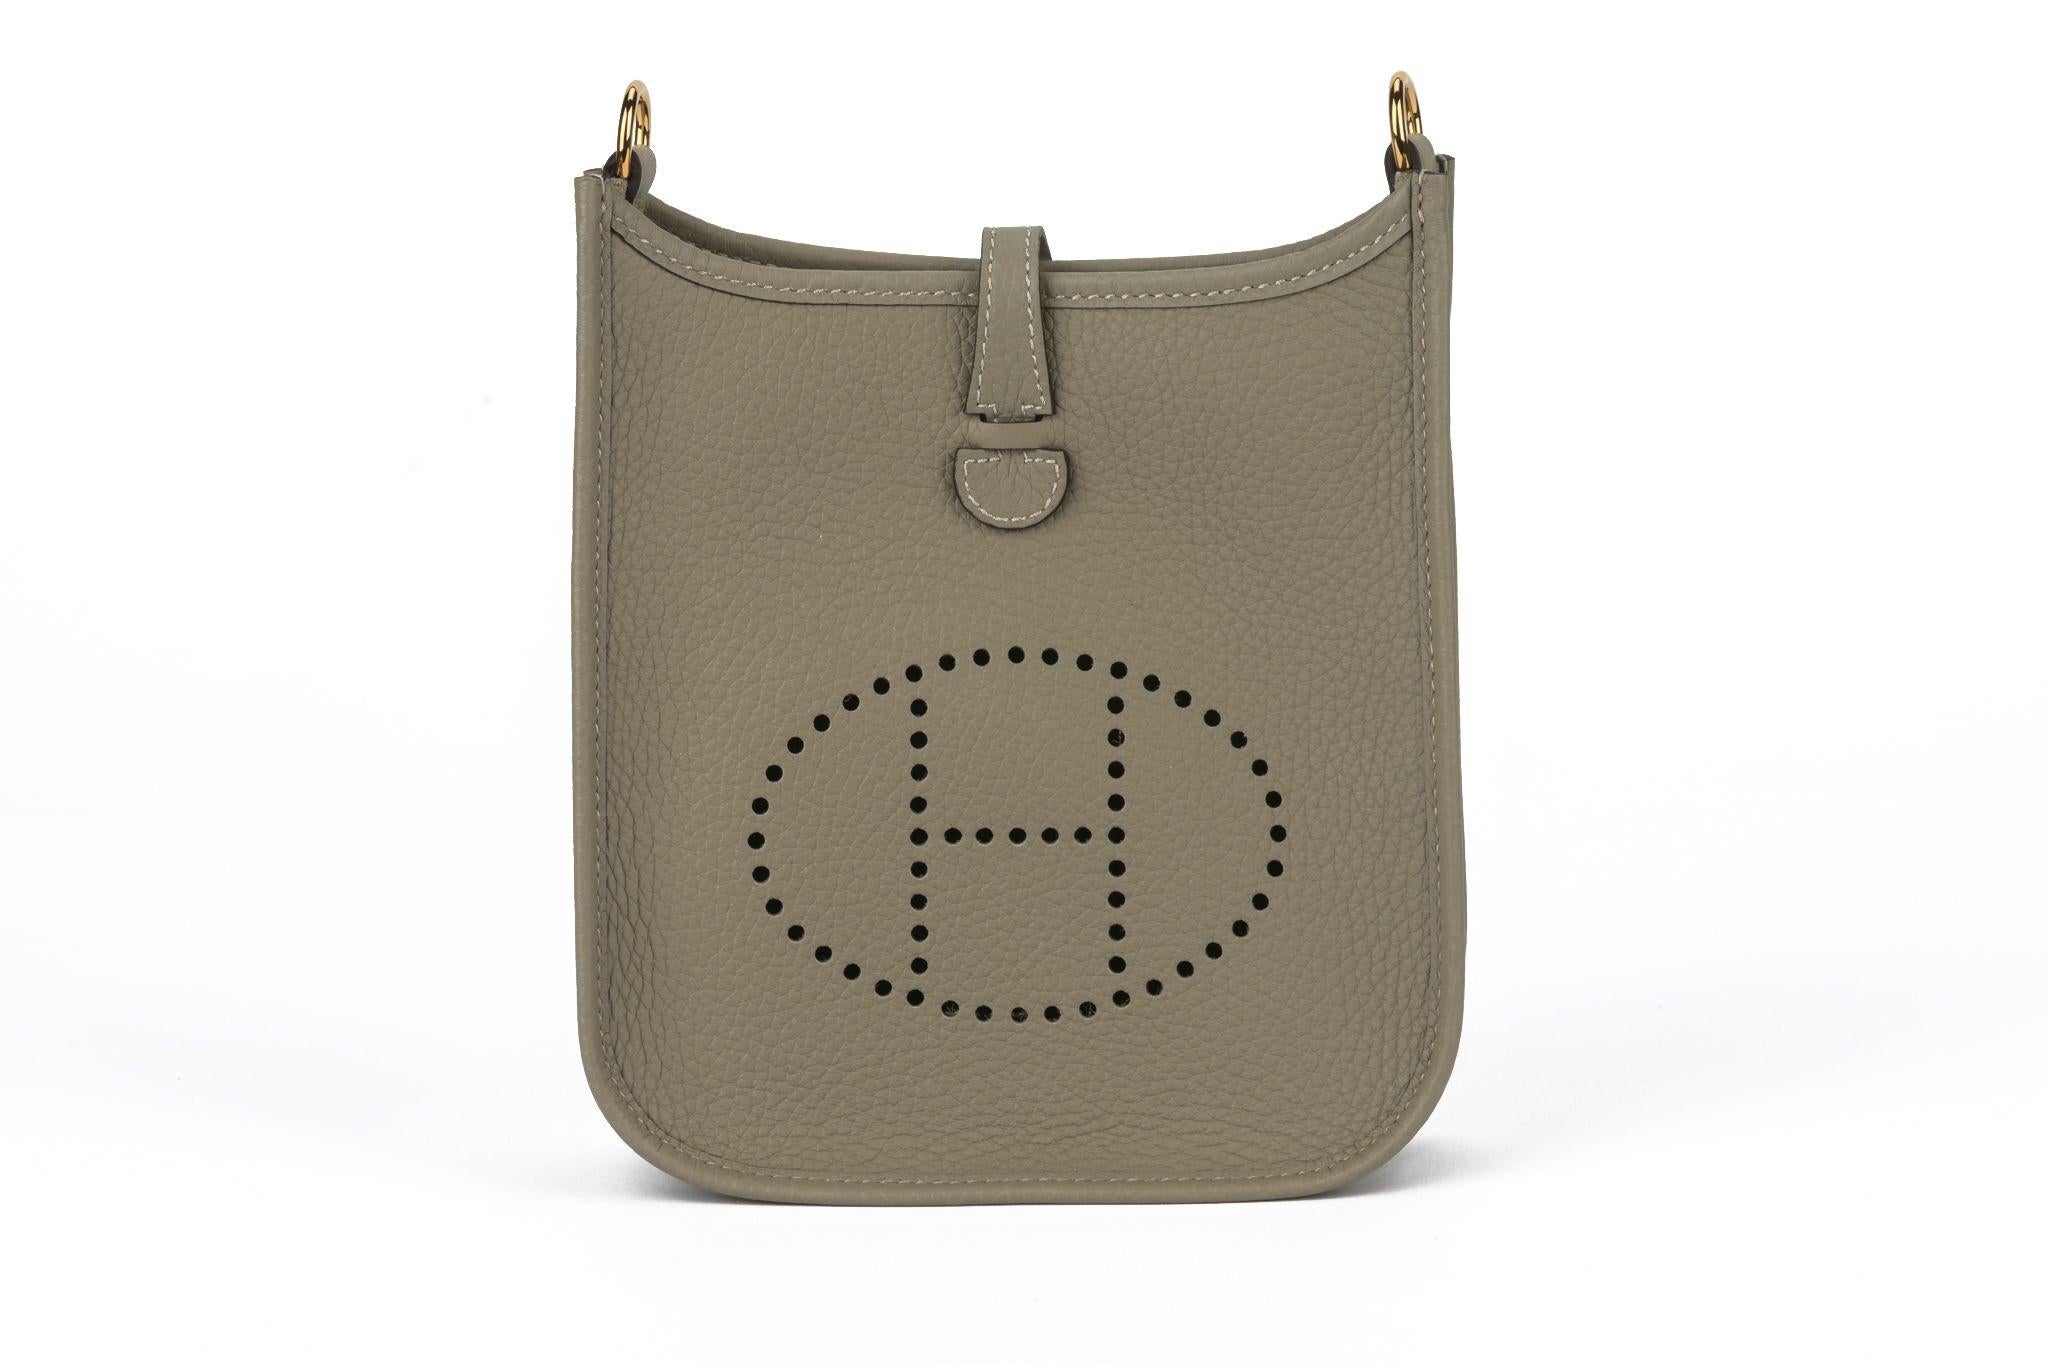 Hermes sage Evelyne TPM in clemence leather with canvas strap. Smallest model of Evelyne has tonal stitching, a large perforated H icon in circle at front, pull tab top closure, and a removable strap, 21